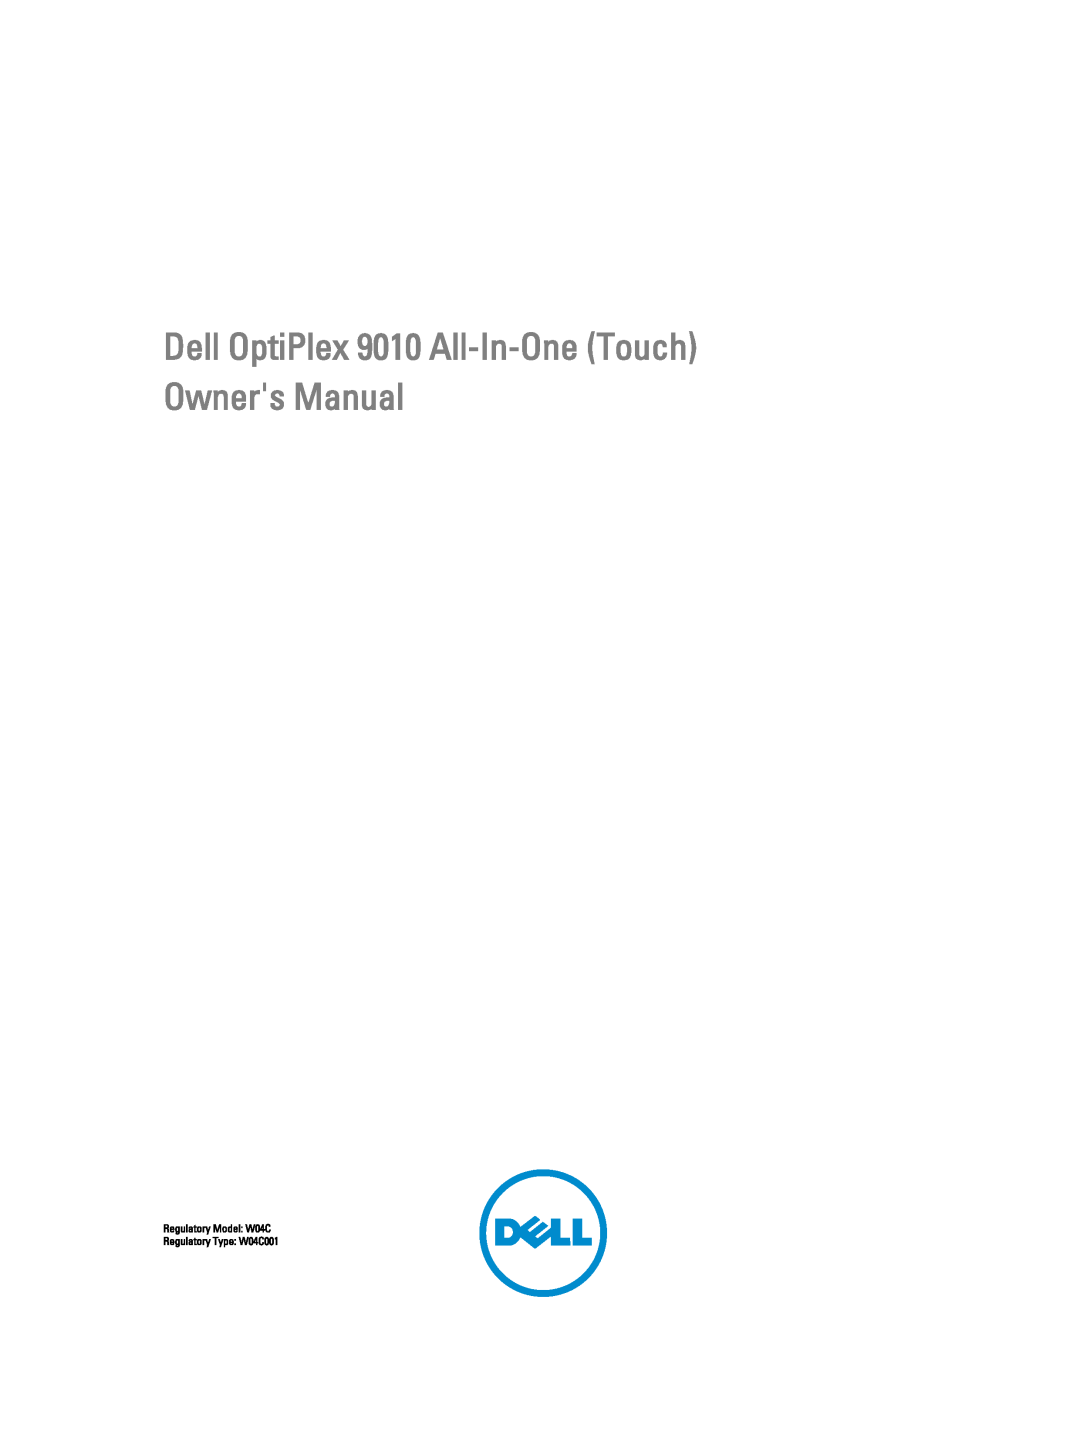 Dell owner manual Dell OptiPlex 9010 All-In-One Touch Owners Manual, Regulatory Model W04C Regulatory Type W04C001 